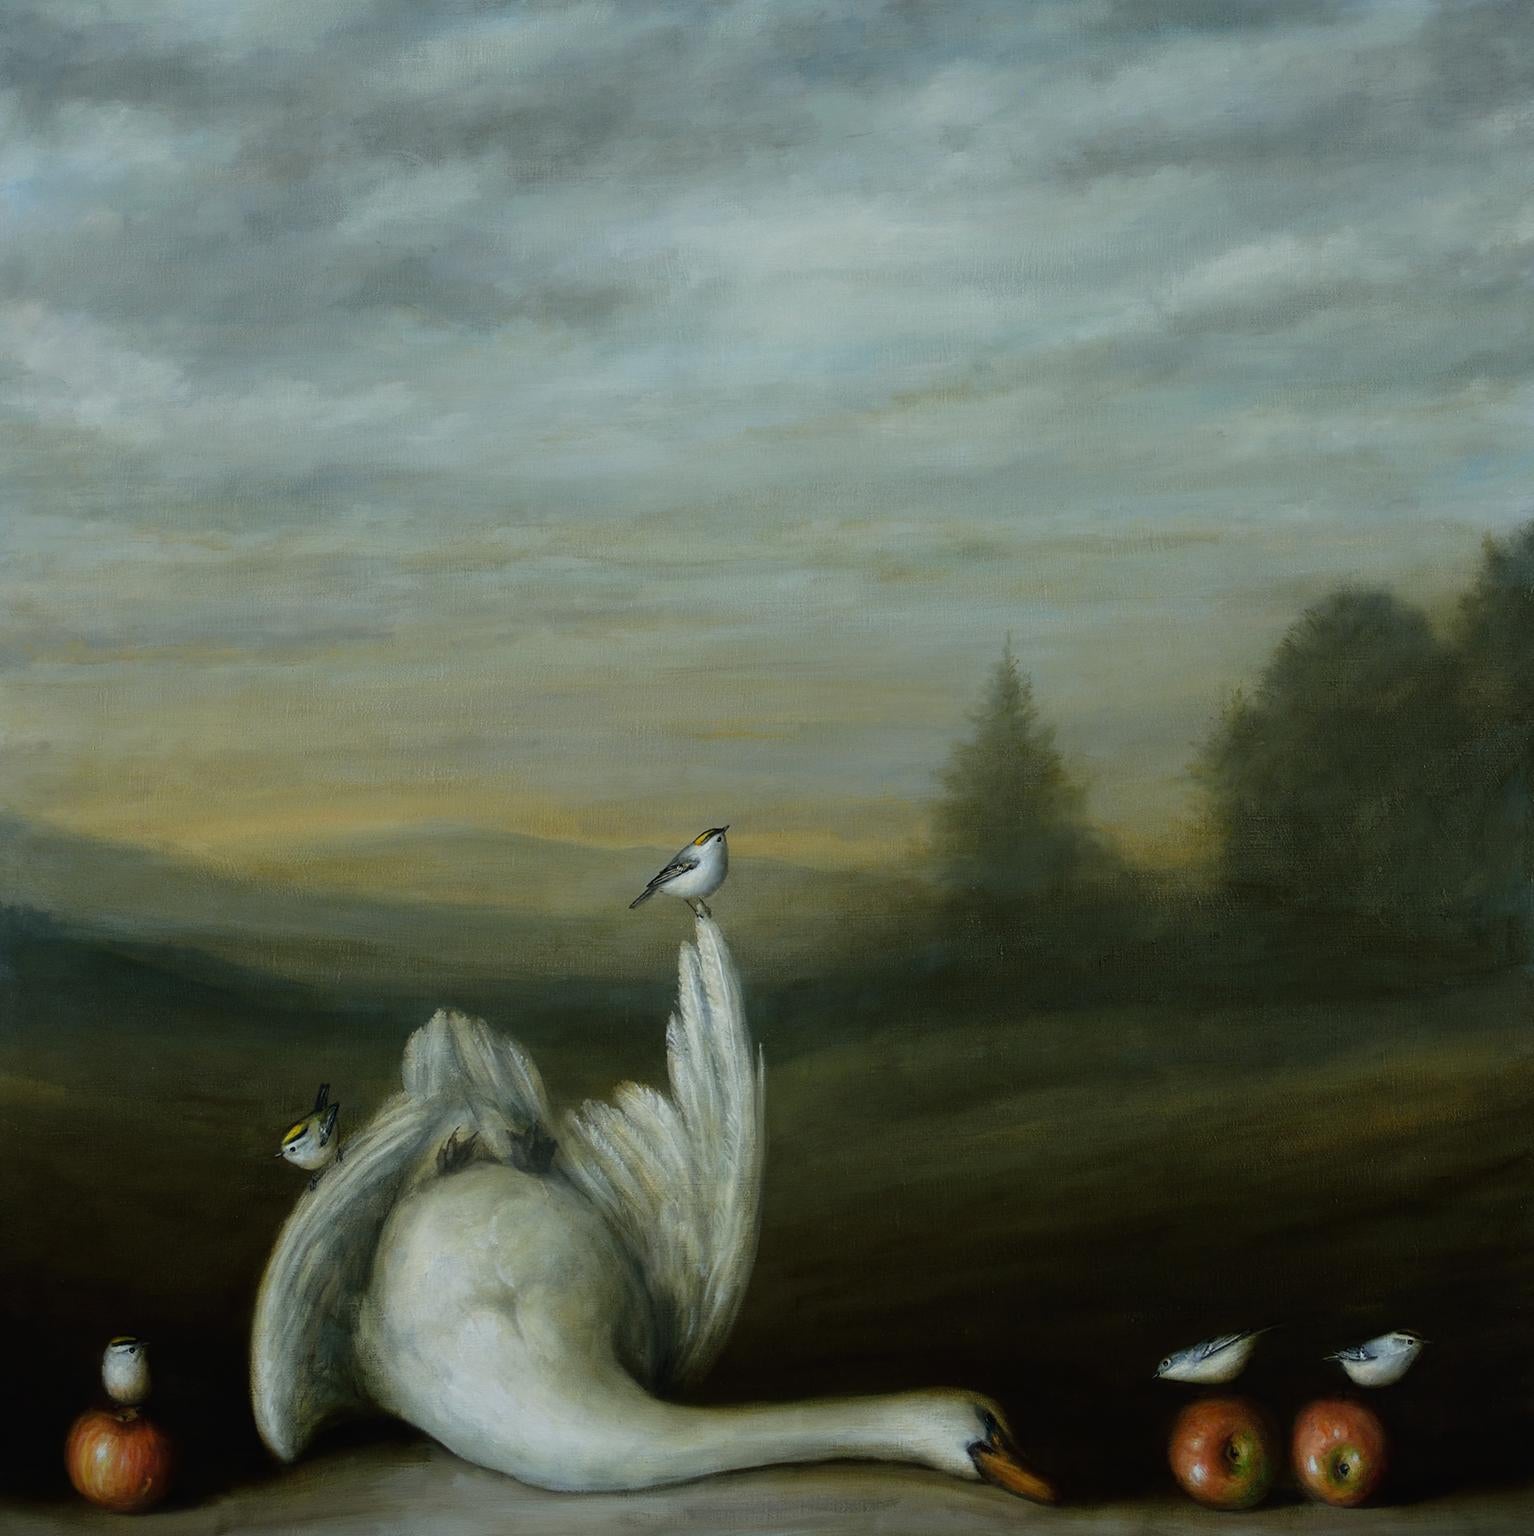 "Landscape (Swan)" still life oil painting with swan